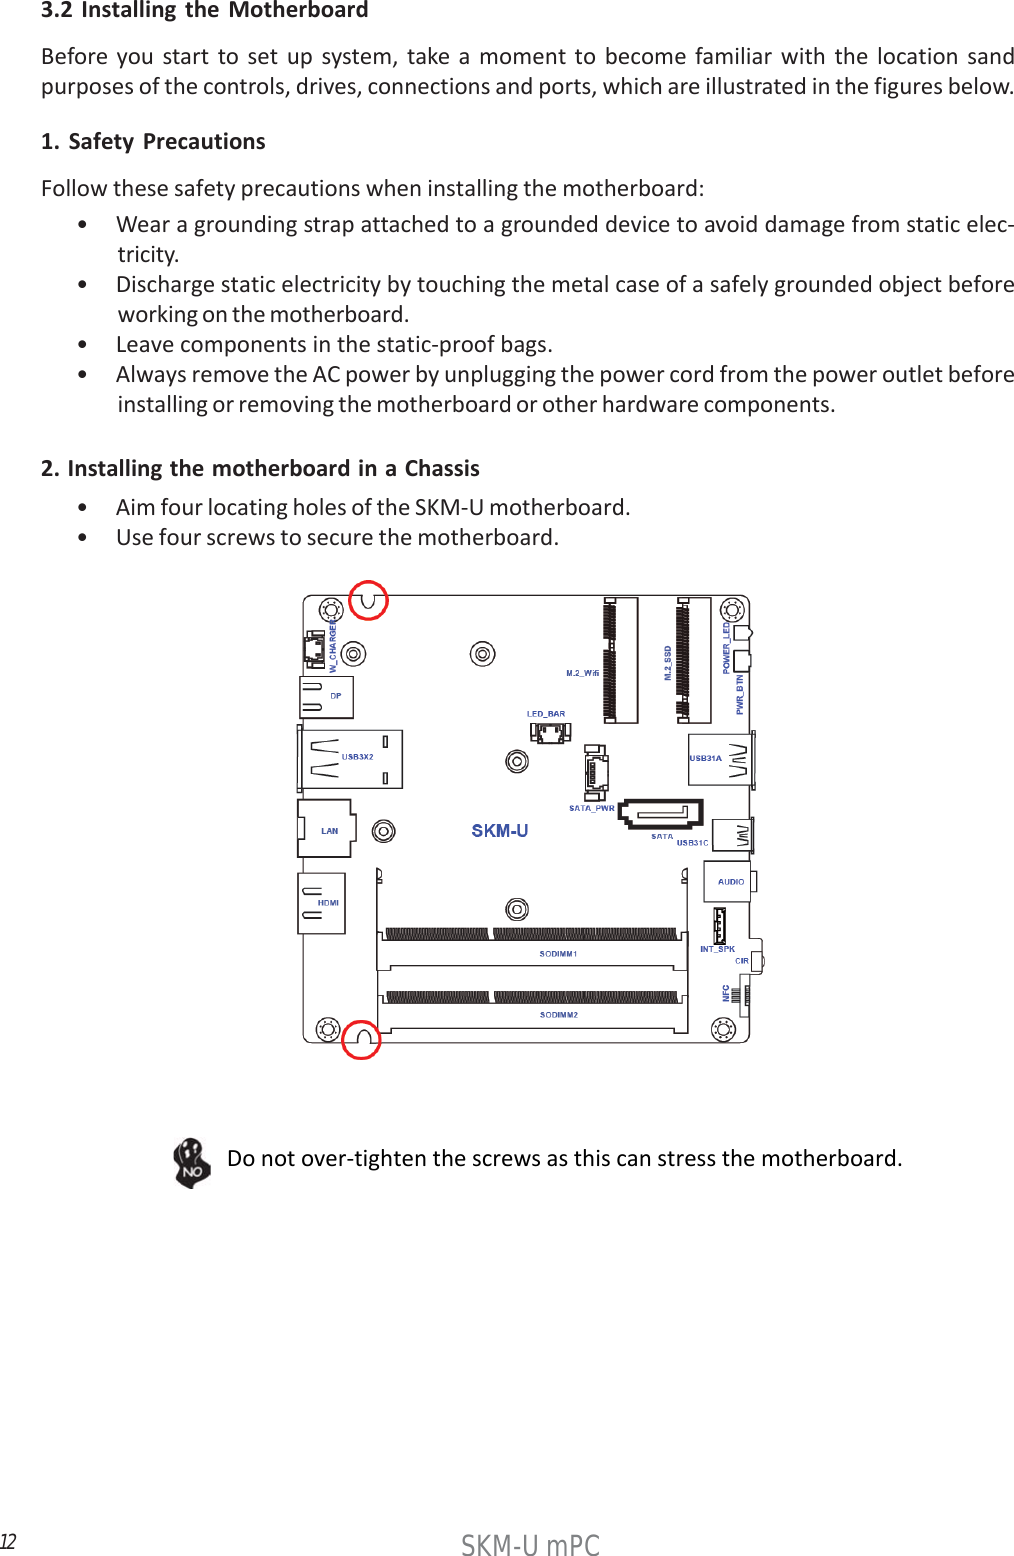 12SKM-U mPC3.2 Installing the MotherboardBefore you start to set up system, take a moment to become familiar with the location sandpurposes of the controls, drives, connections and ports, which are illustrated in the figures below.1. Safety PrecautionsFollow these safety precautions when installing the motherboard:• Wear a grounding strap attached to a grounded device to avoid damage from static elec-tricity.• Discharge static electricity by touching the metal case of a safely grounded object beforeworking on the motherboard.• Leave components in the static-proof bags.• Always remove the AC power by unplugging the power cord from the power outlet beforeinstalling or removing the motherboard or other hardware components.2. Installing the motherboard in a Chassis• Aim four locating holes of the SKM-U motherboard.• Use four screws to secure the motherboard.Do not over-tighten the screws as this can stress the motherboard.